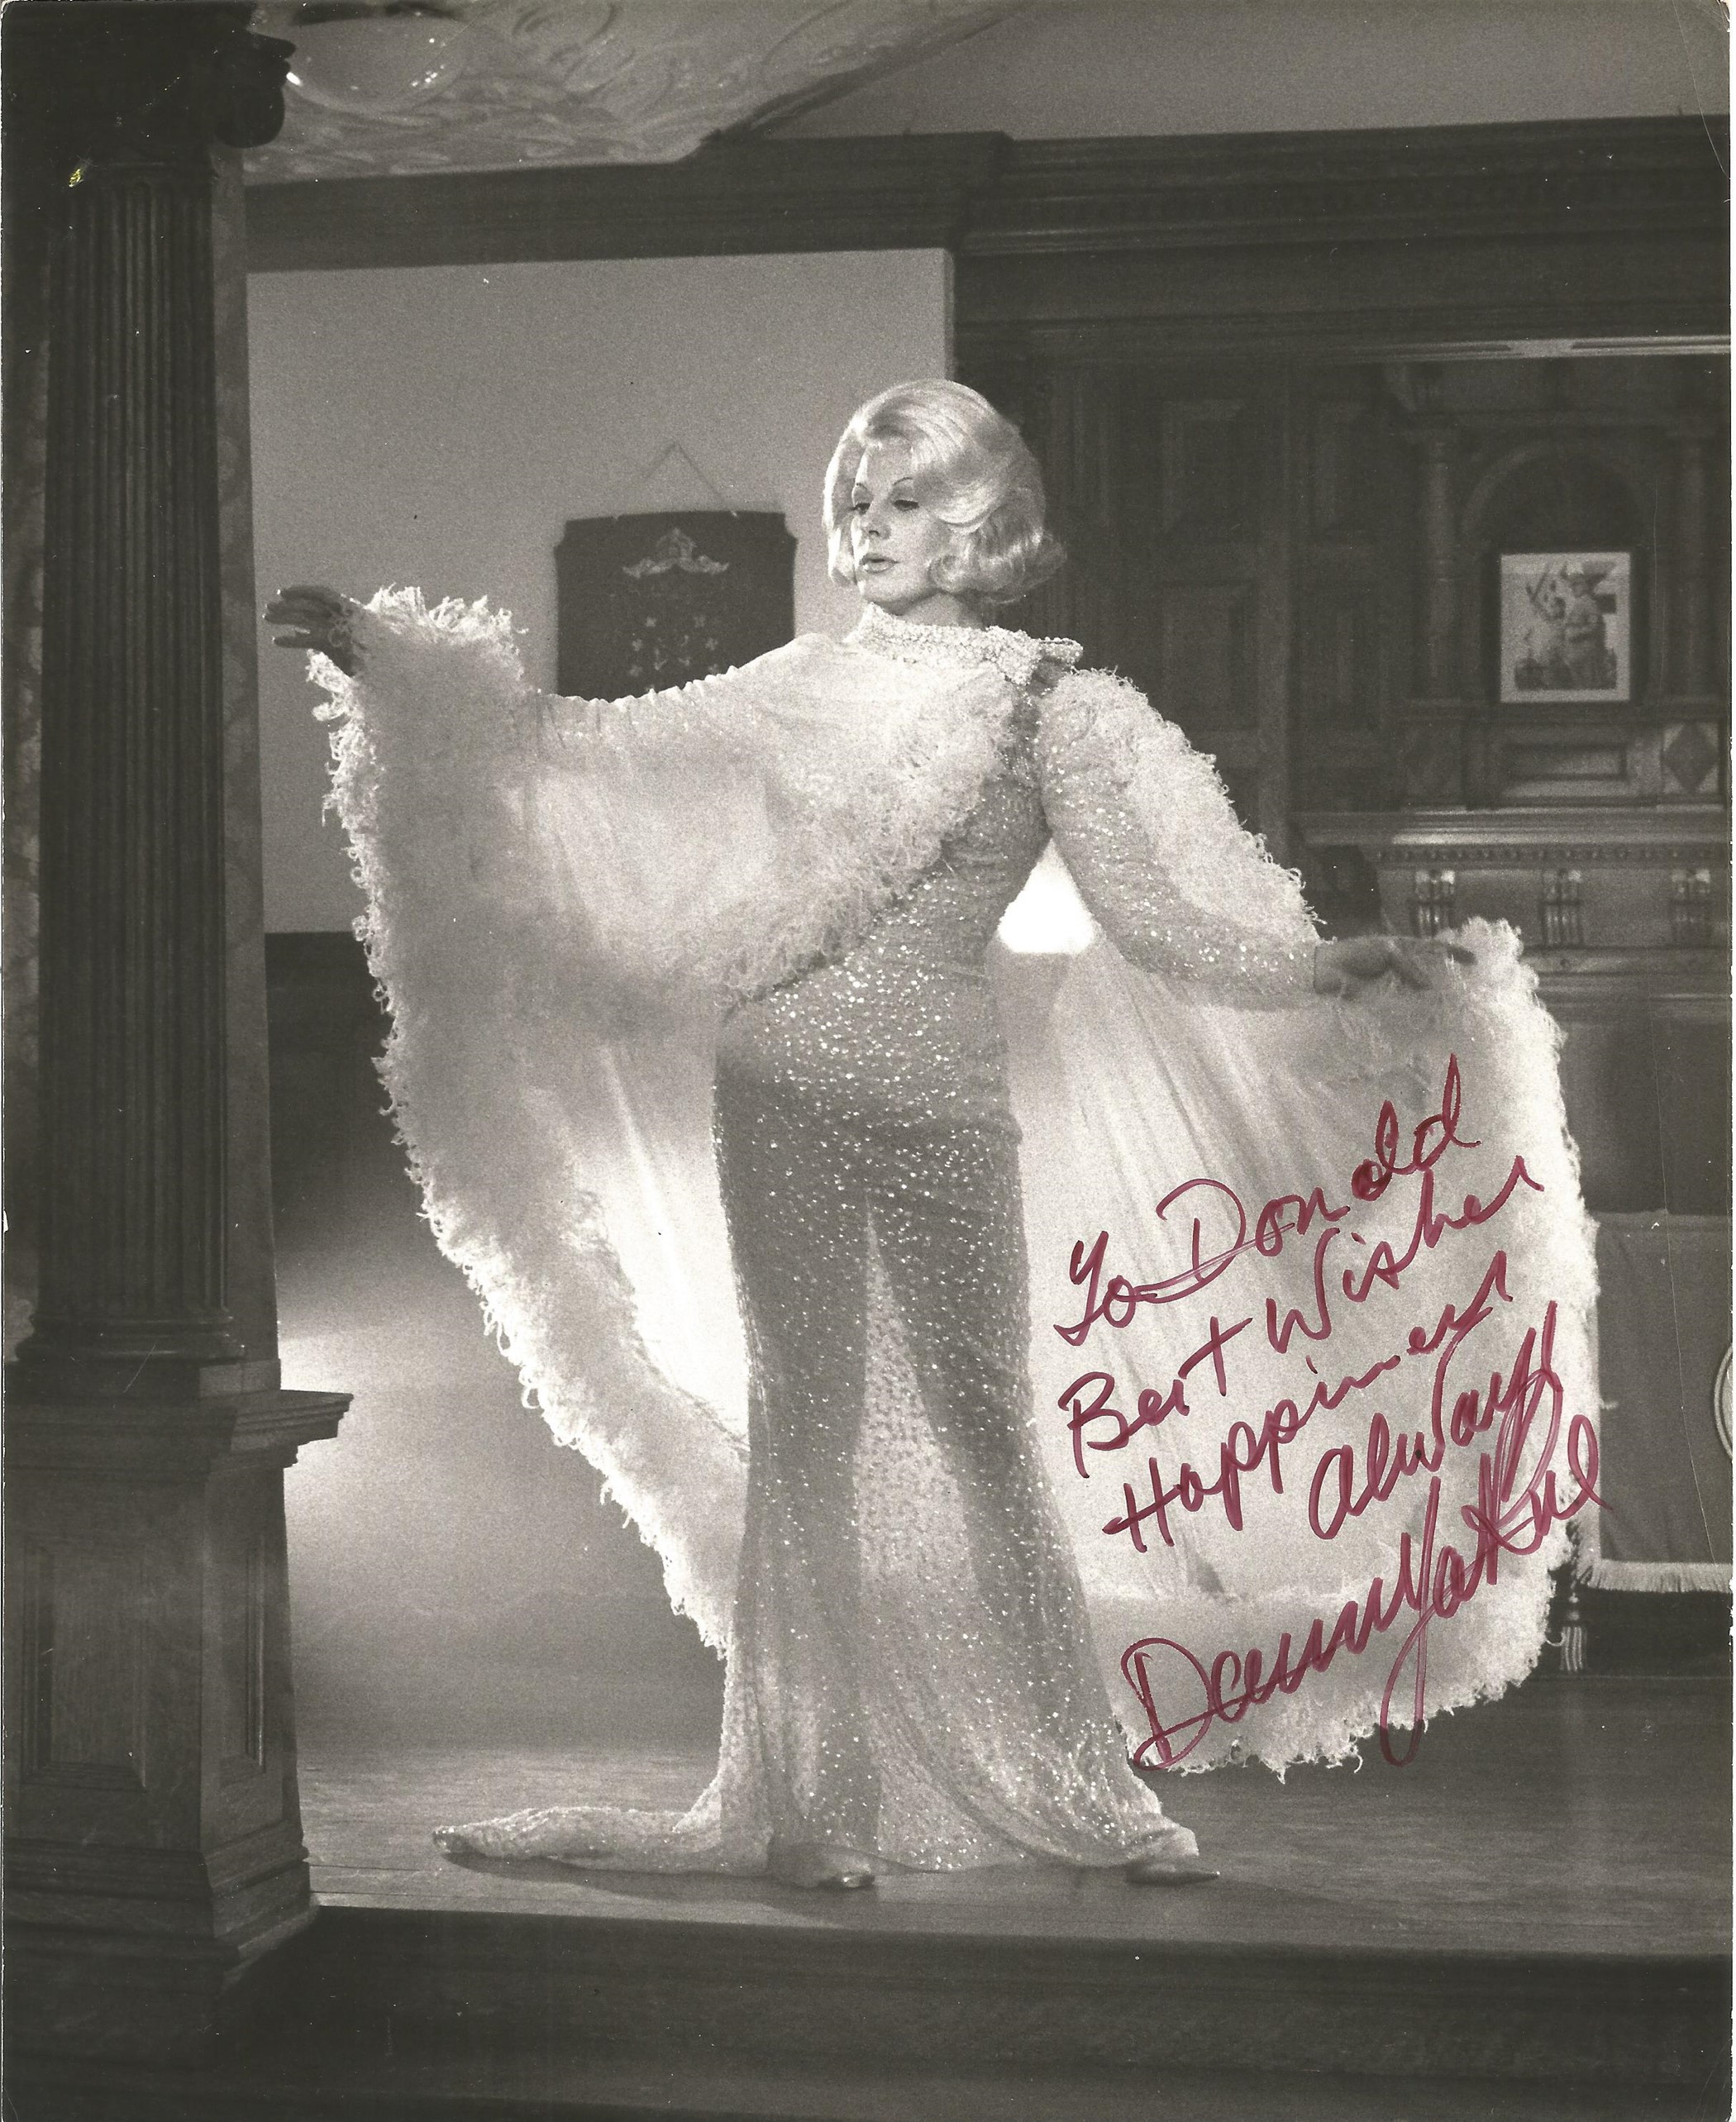 Singer Danny La Rue, signed 10x8 black and white photo in drag, dedicated to Donald, inscribed